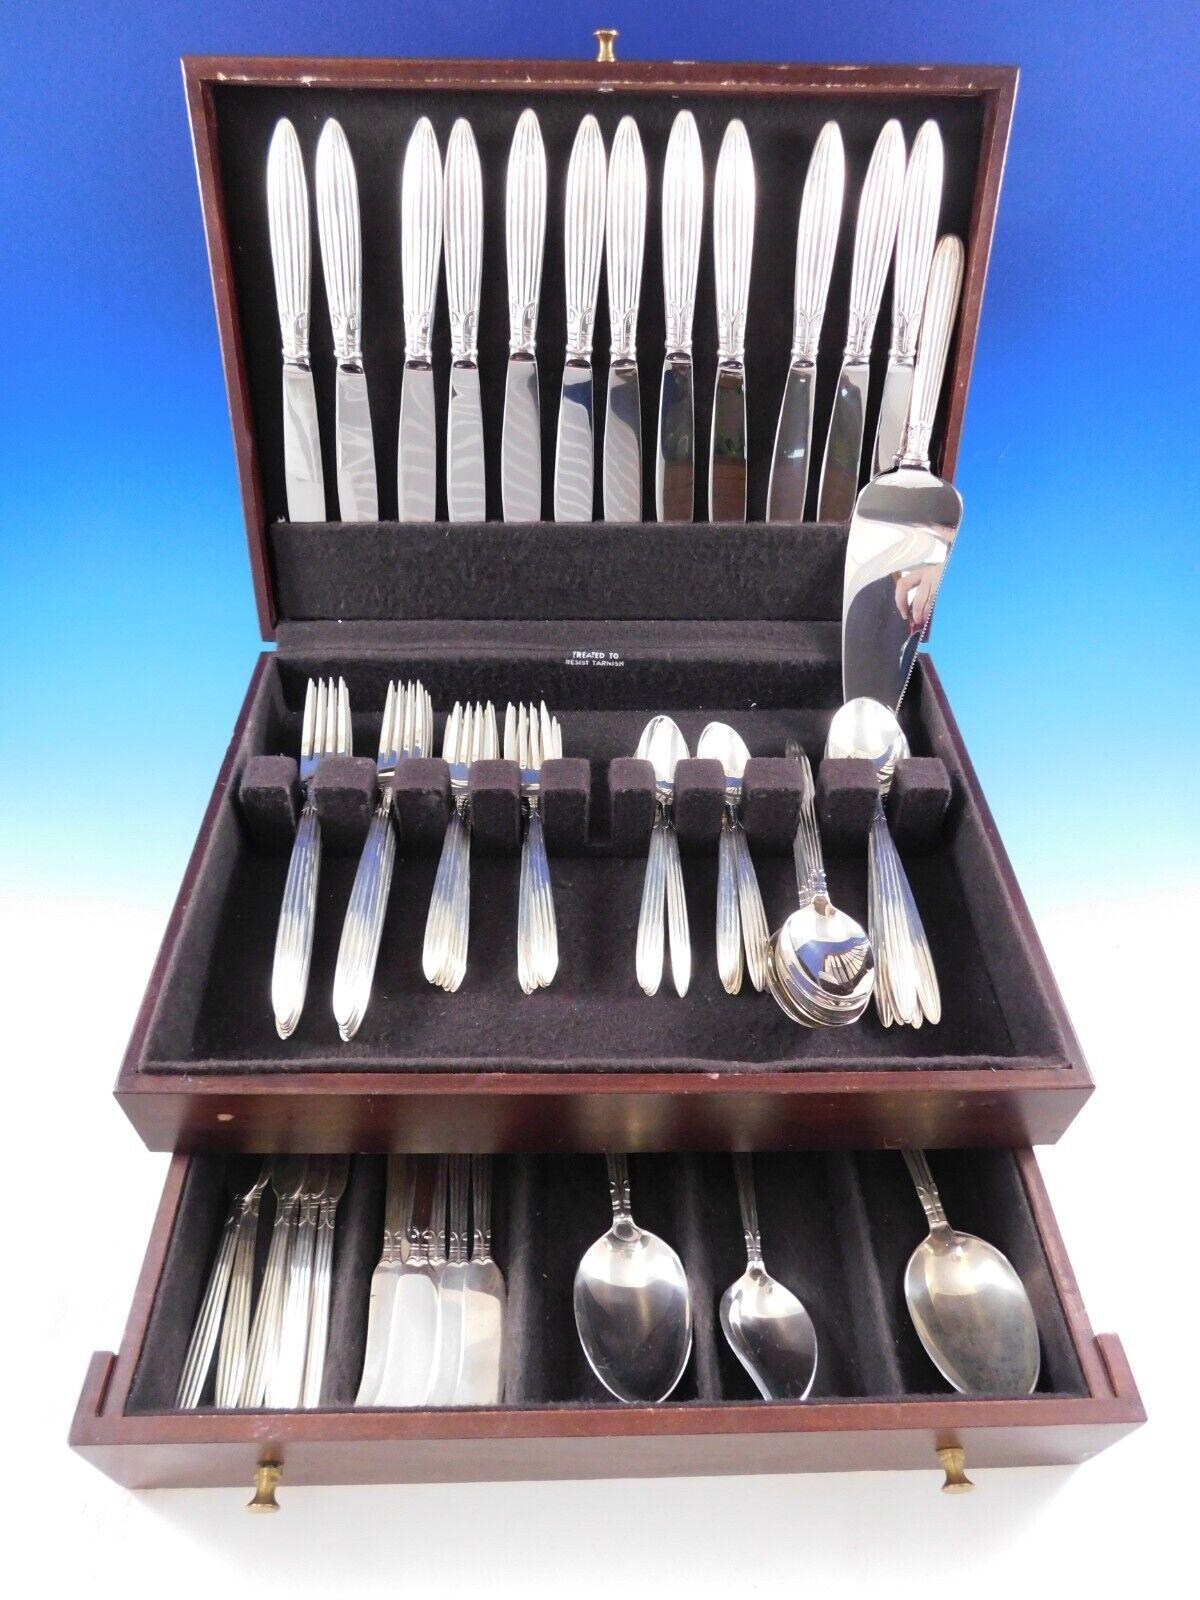 Jubilee by Reed & Baron sterling silver flatware set - 76 pieces. This set includes:

12 dinner knives, pointed, 9 1/2